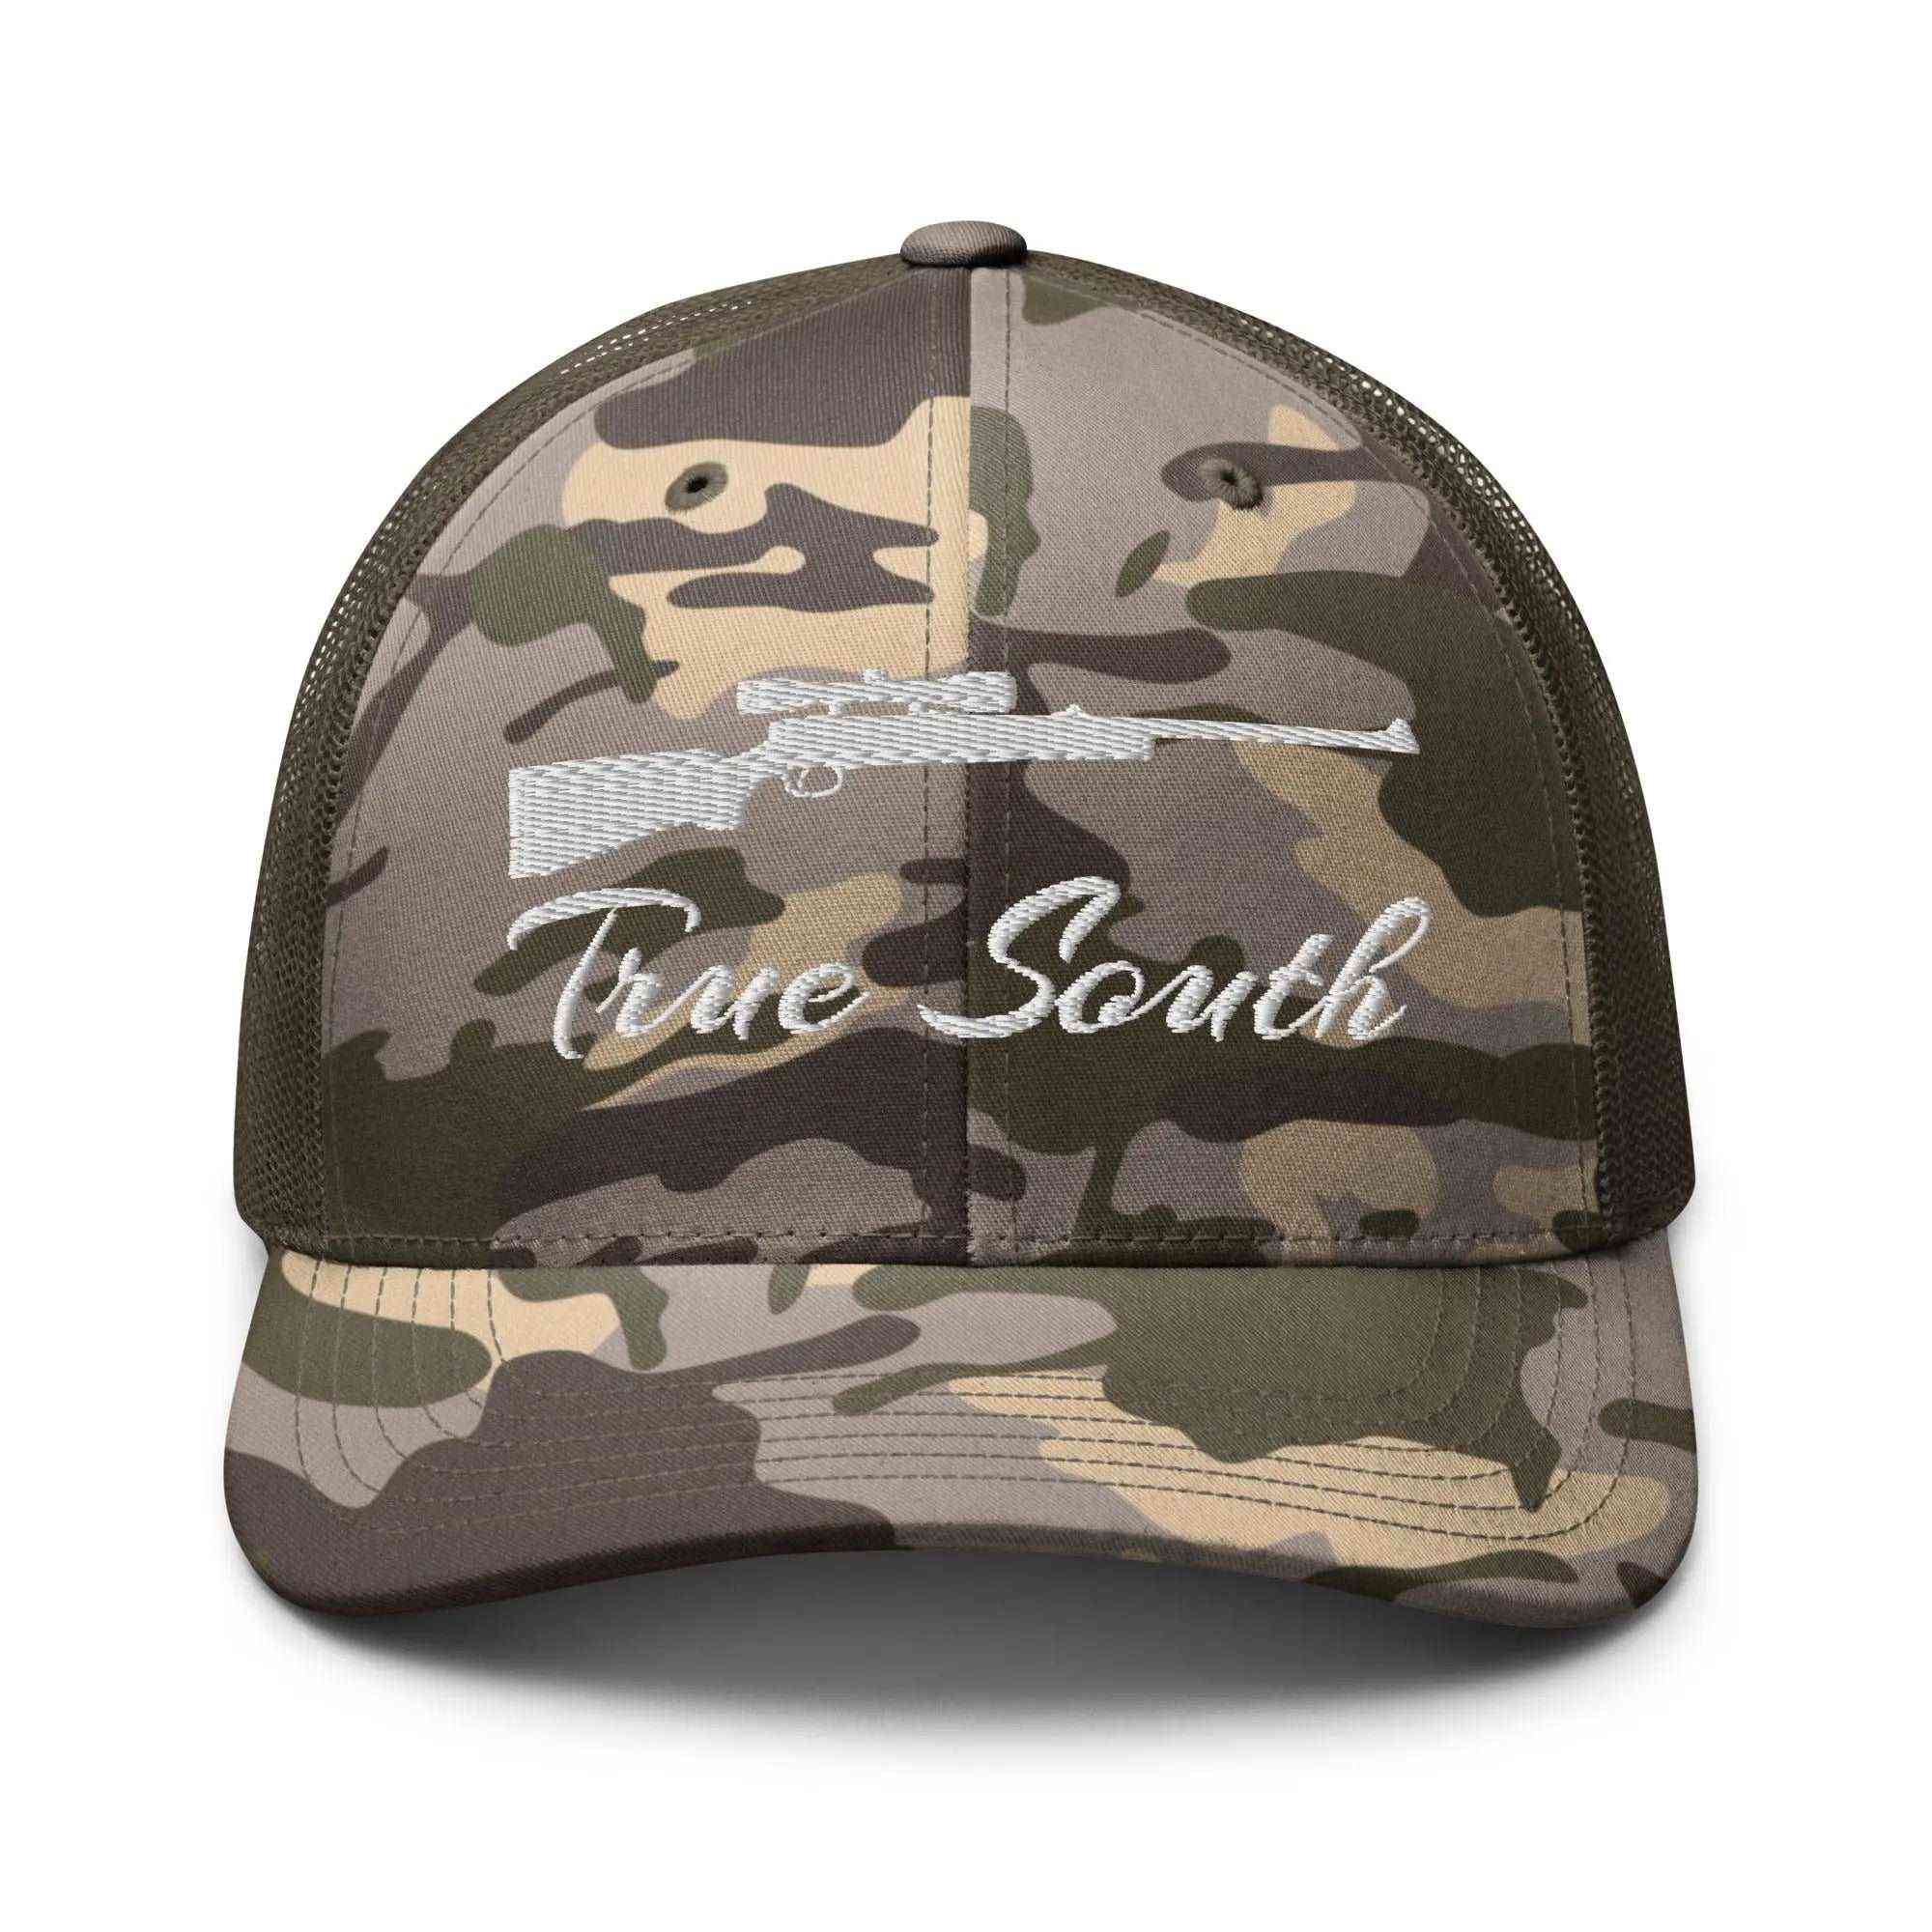 Southern Style Camo Rifle Hat: Blend In with Southern Charm